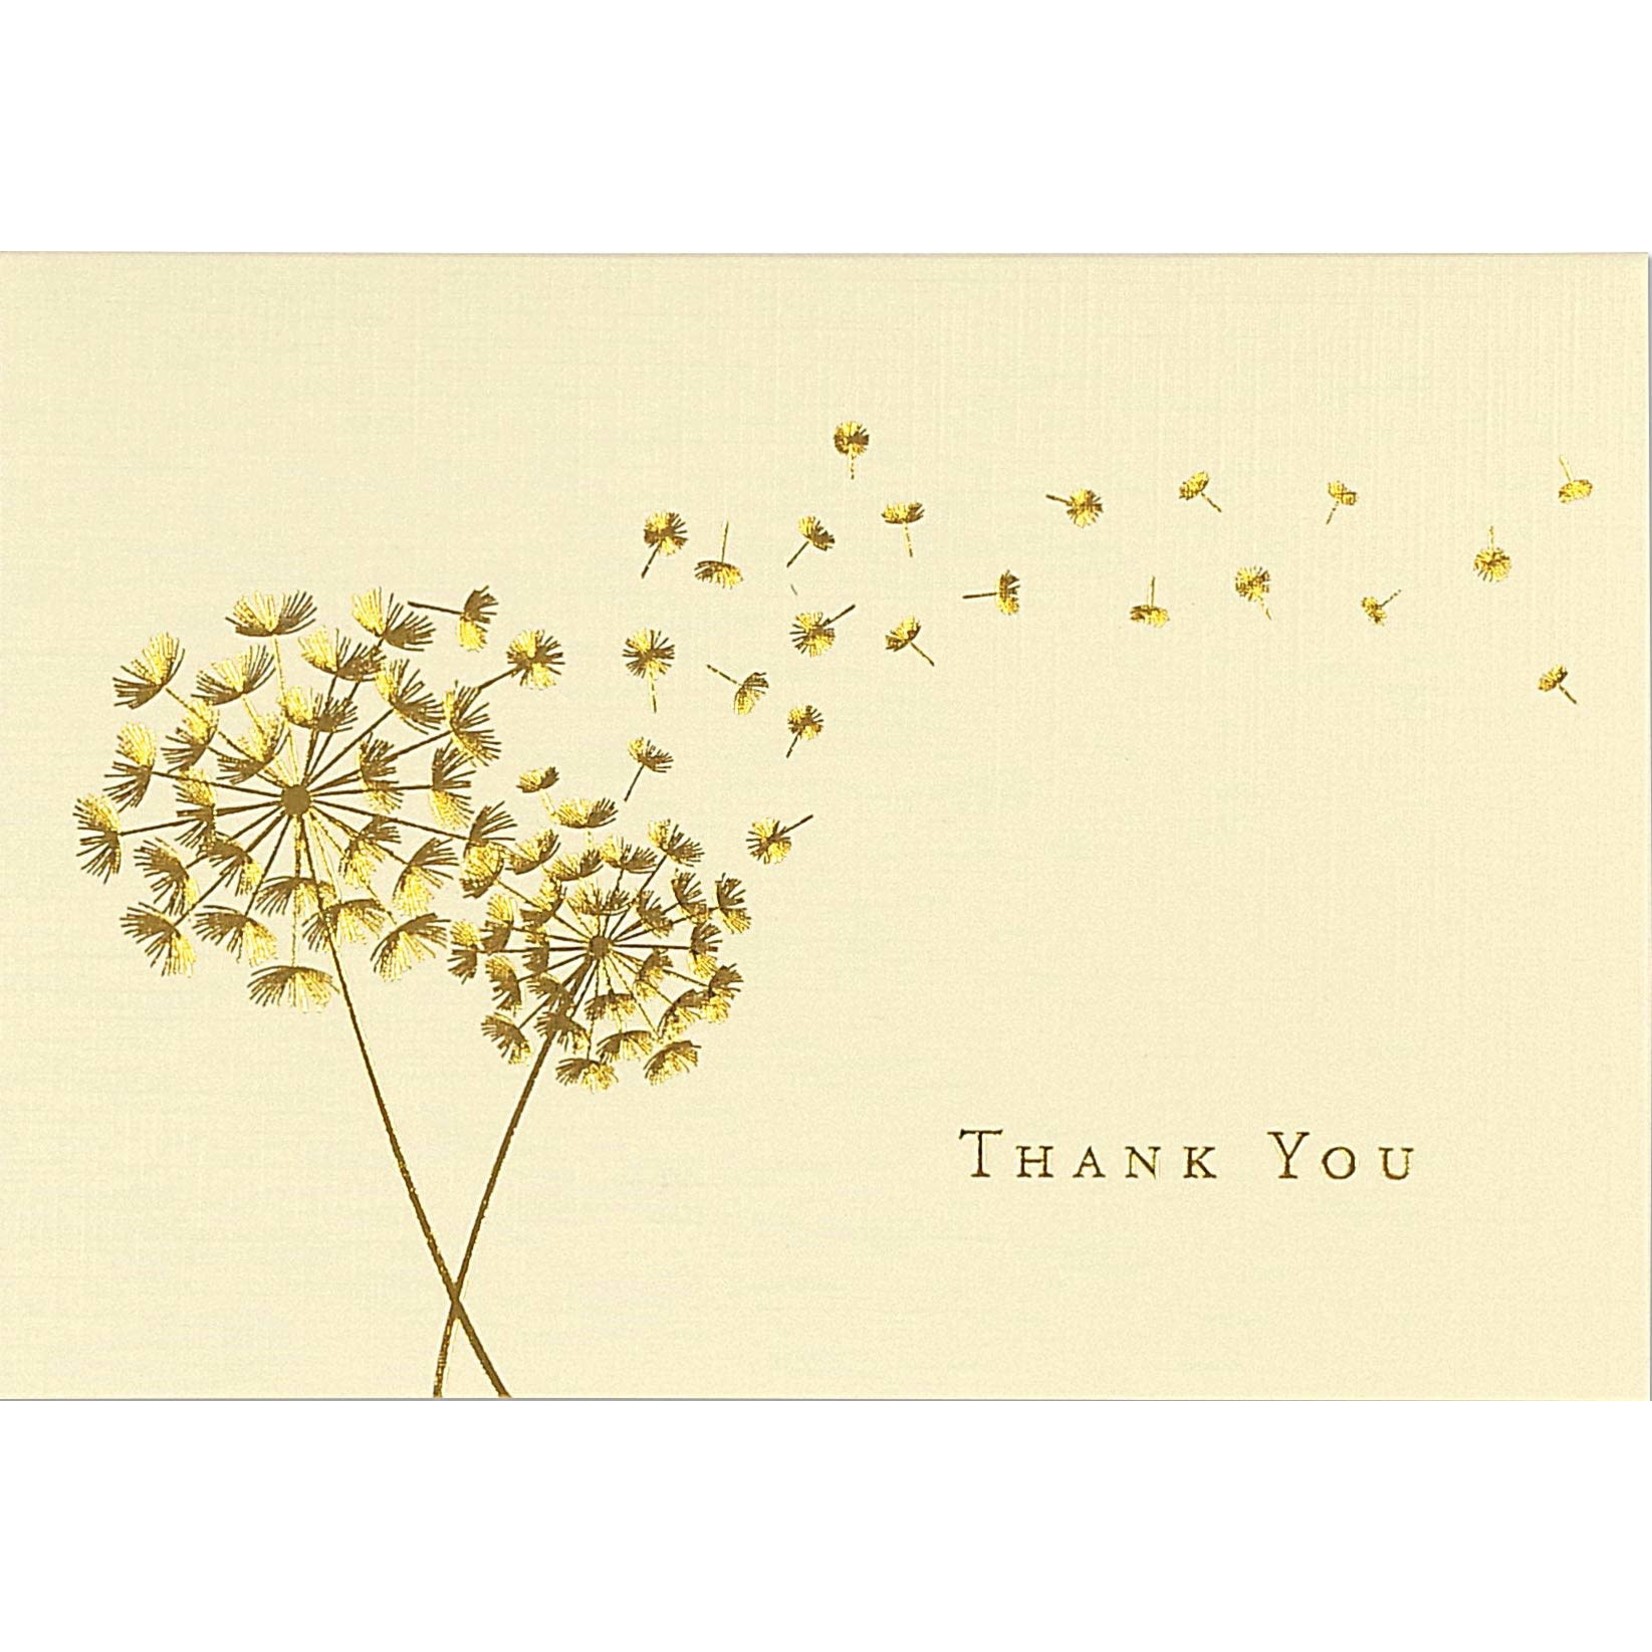 Peter Pauper Press Boxed Thank You Cards: Dandelion Wishes